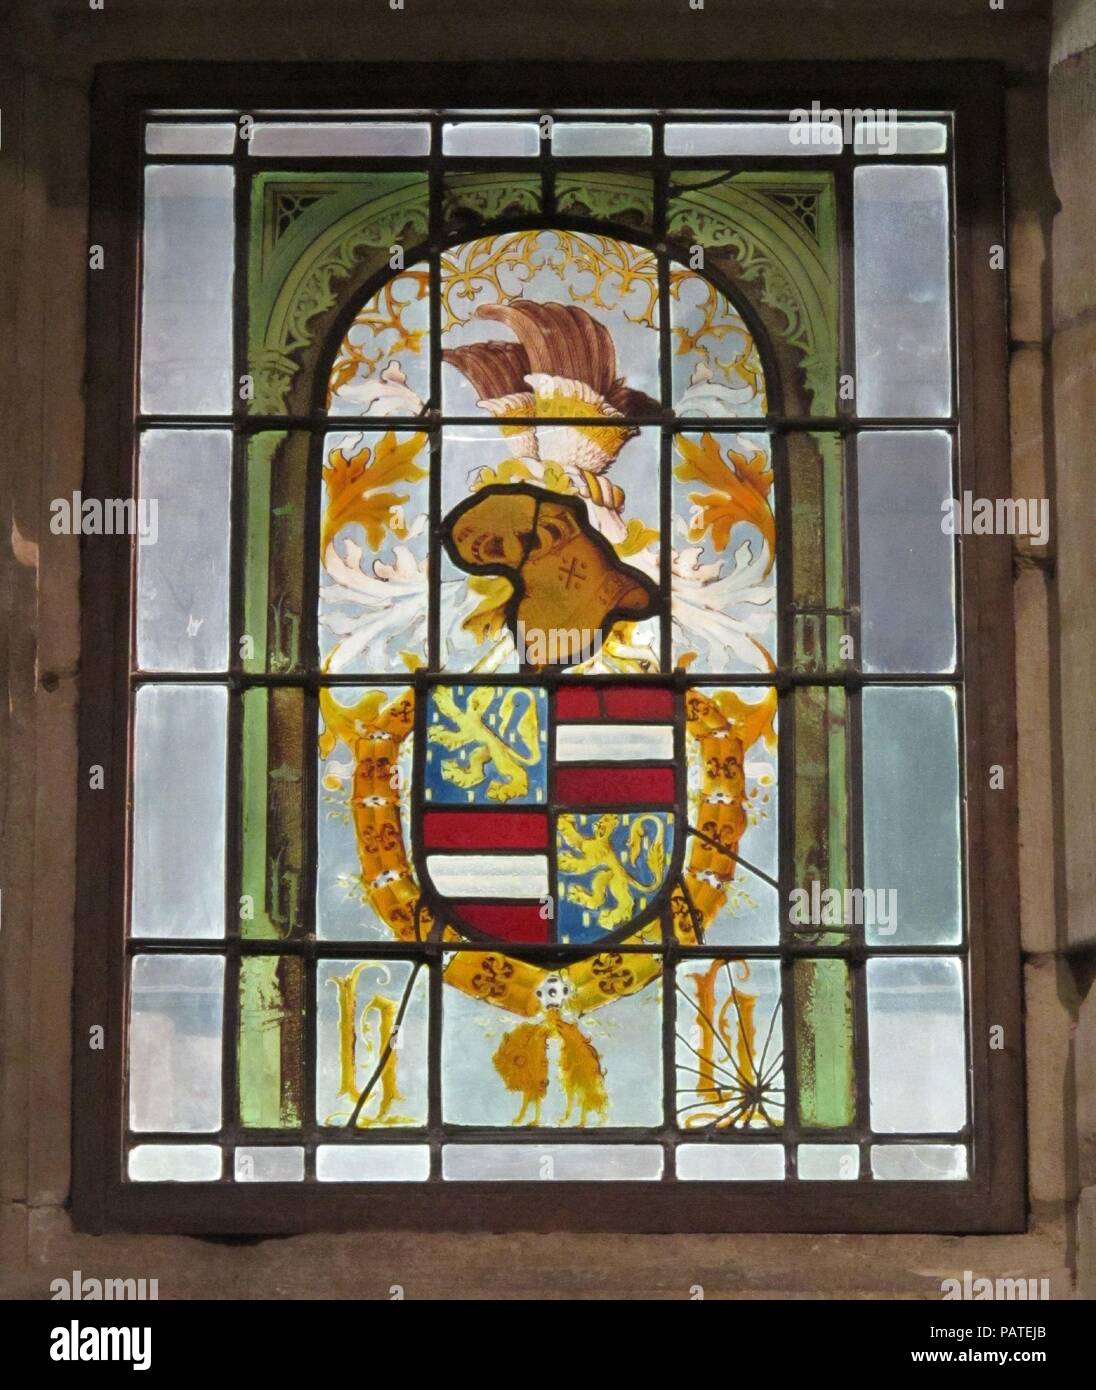 Heraldic Panel with Arms of the House of Hapsburg. Culture: South Netherlandish. Dimensions: Overall: 34 x 21 in. (86.4 x 53.3 cm). Date: ca. 1504-6.  The Gravensteen (Castle of the Count) at Ghent was the principal domain of the Hapsburgs in South Flanders. This stained-glass panel, thought to have come from this imperial residence, is part of a larger series ordered either by Maximilian I or Charles V. Museum: Metropolitan Museum of Art, New York, USA. Stock Photo